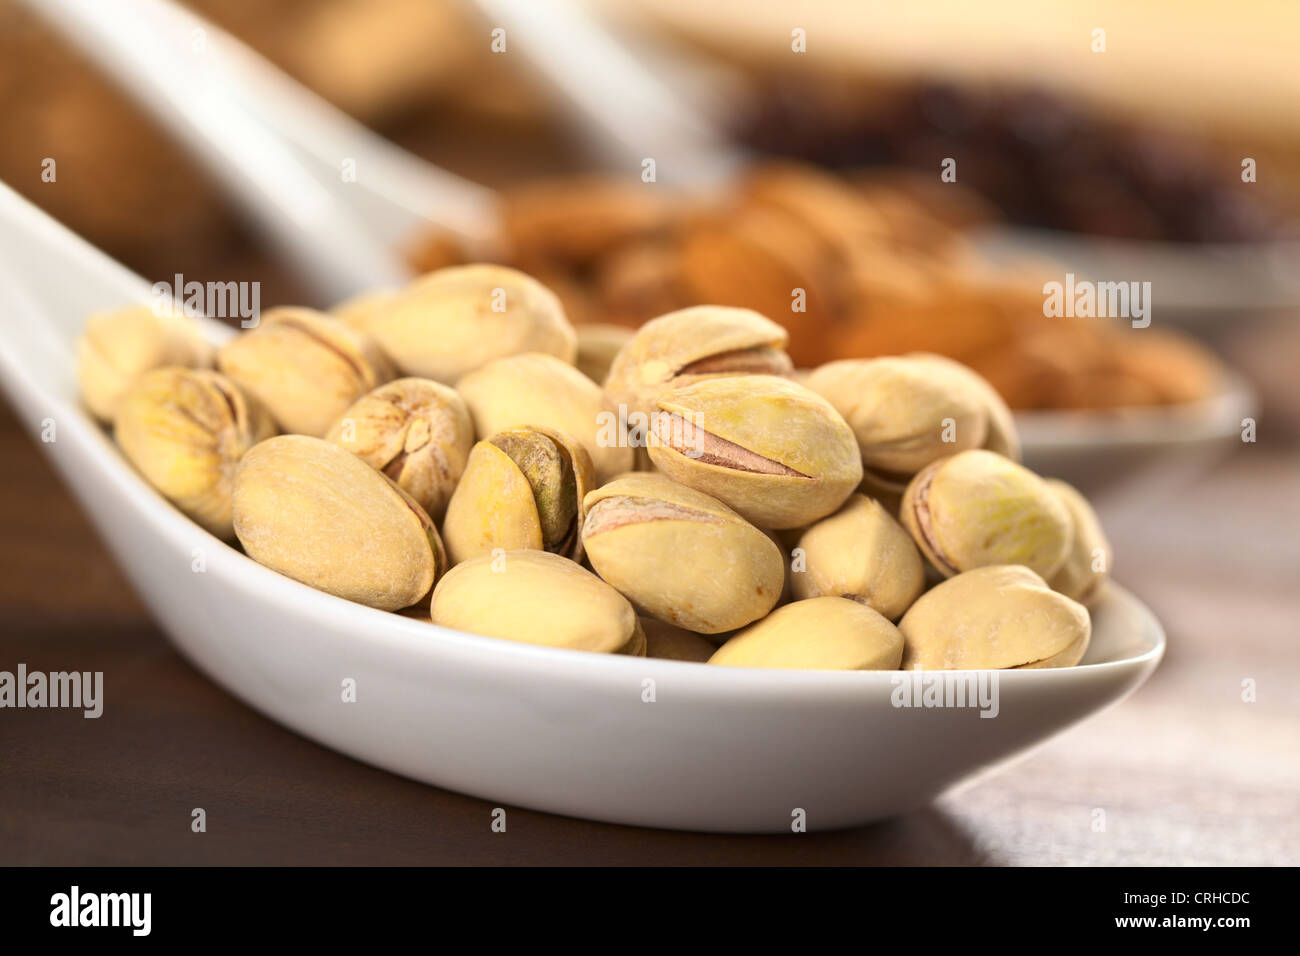 Roasted pistachio nuts with shell (Selective Focus, Focus on the upper right pistachio) Stock Photo